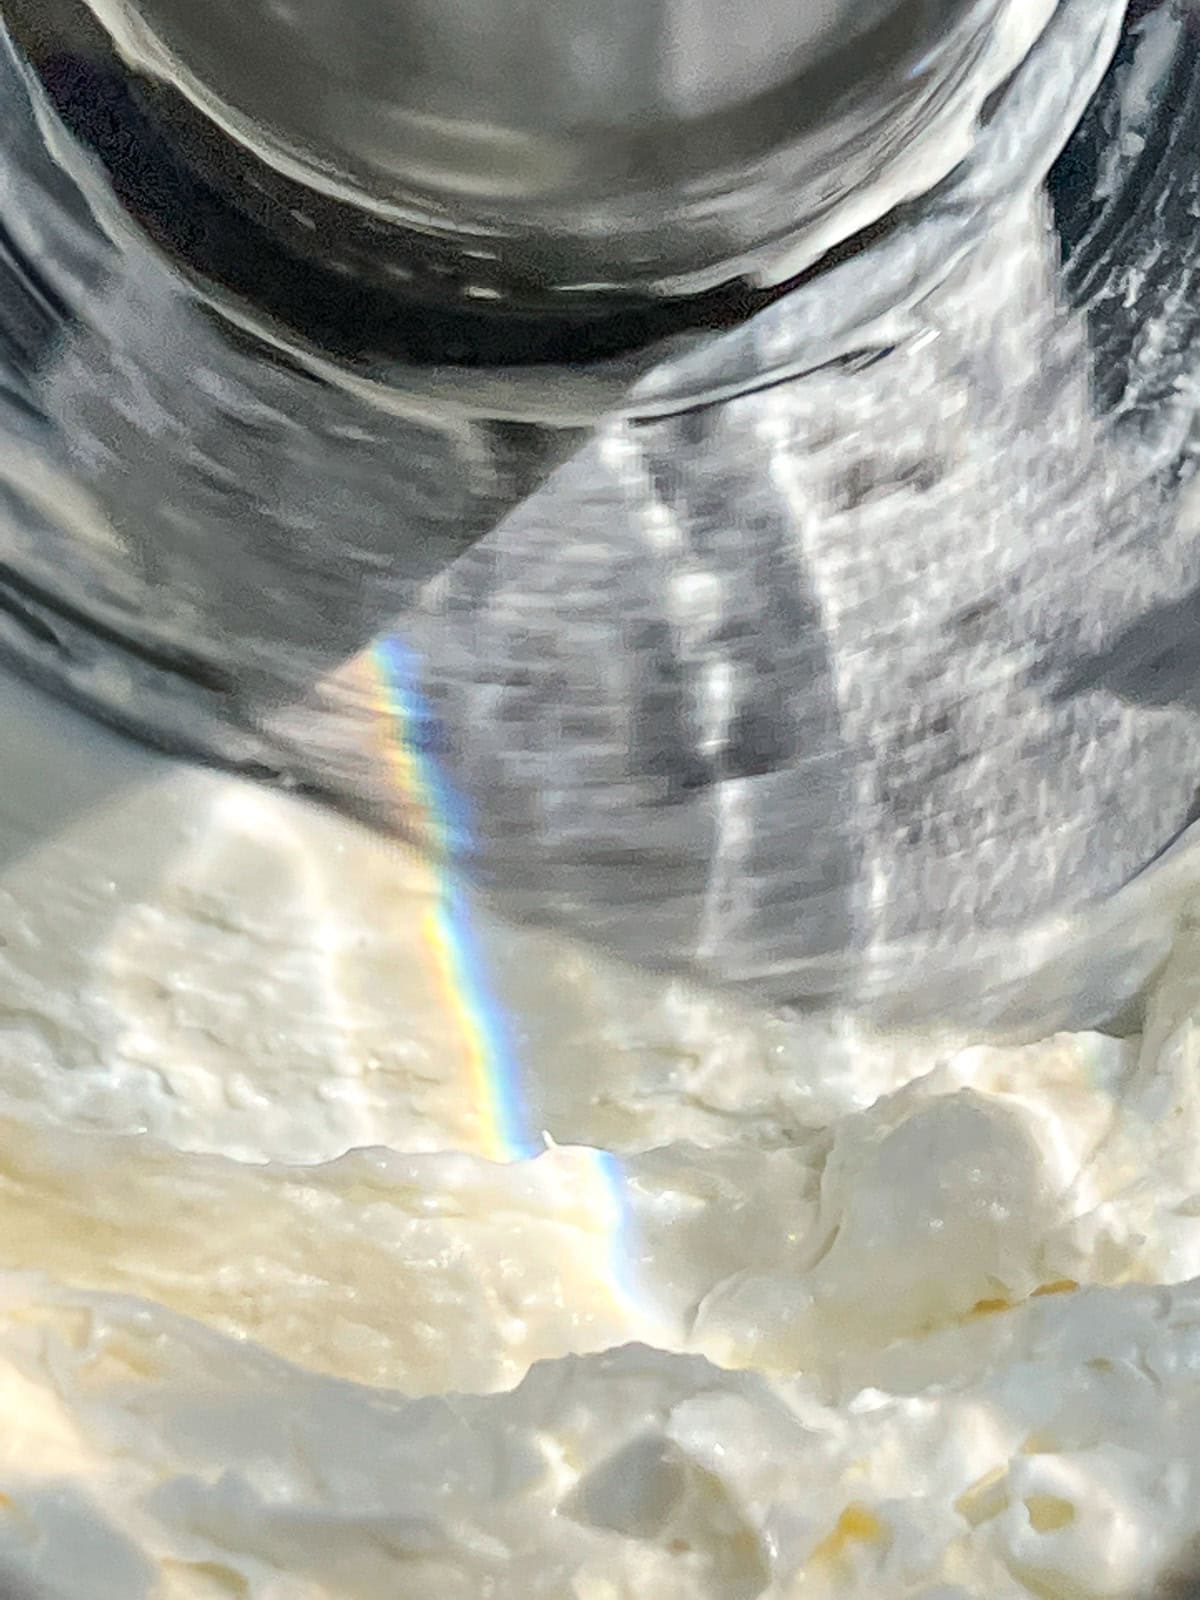 An image of feta, labneh, and garlic in the bowl of a food processor.